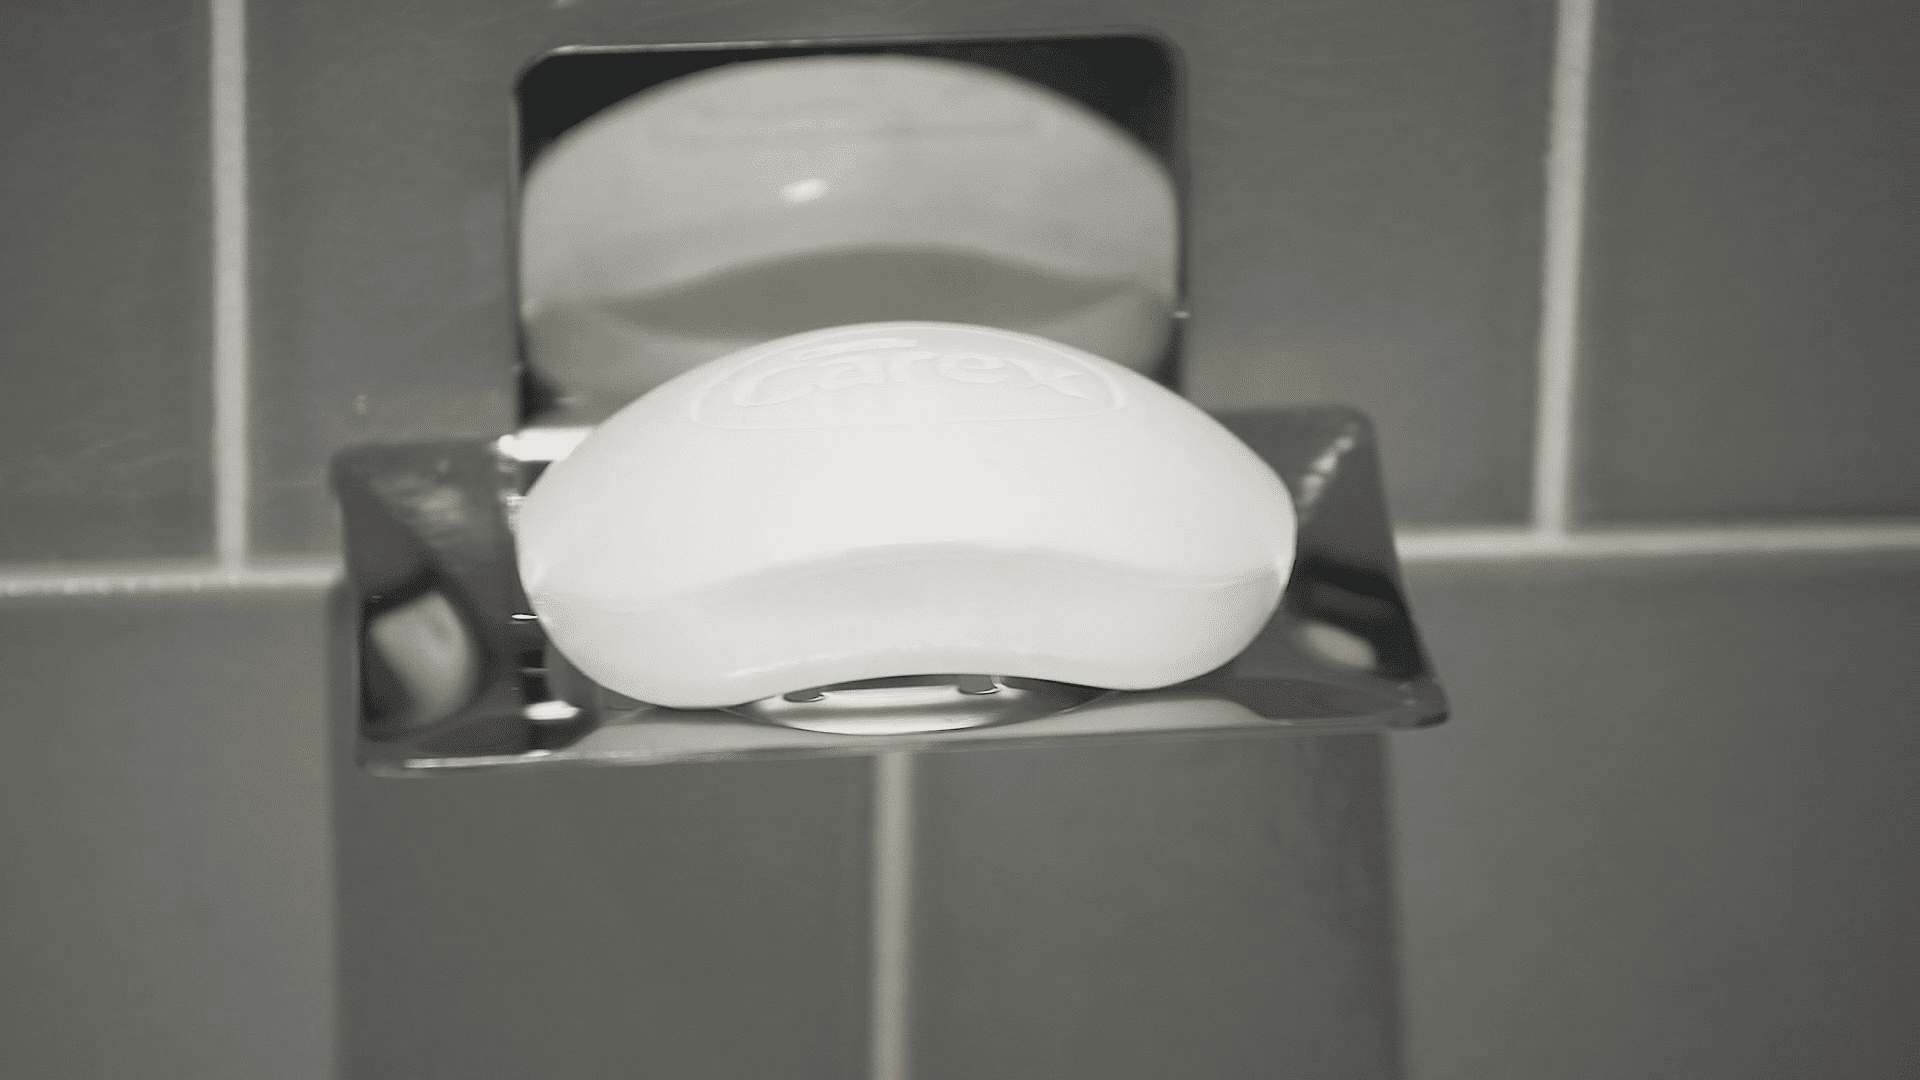 Bathroom Organization Ideas -Mount Your Soap Dish To The Wall